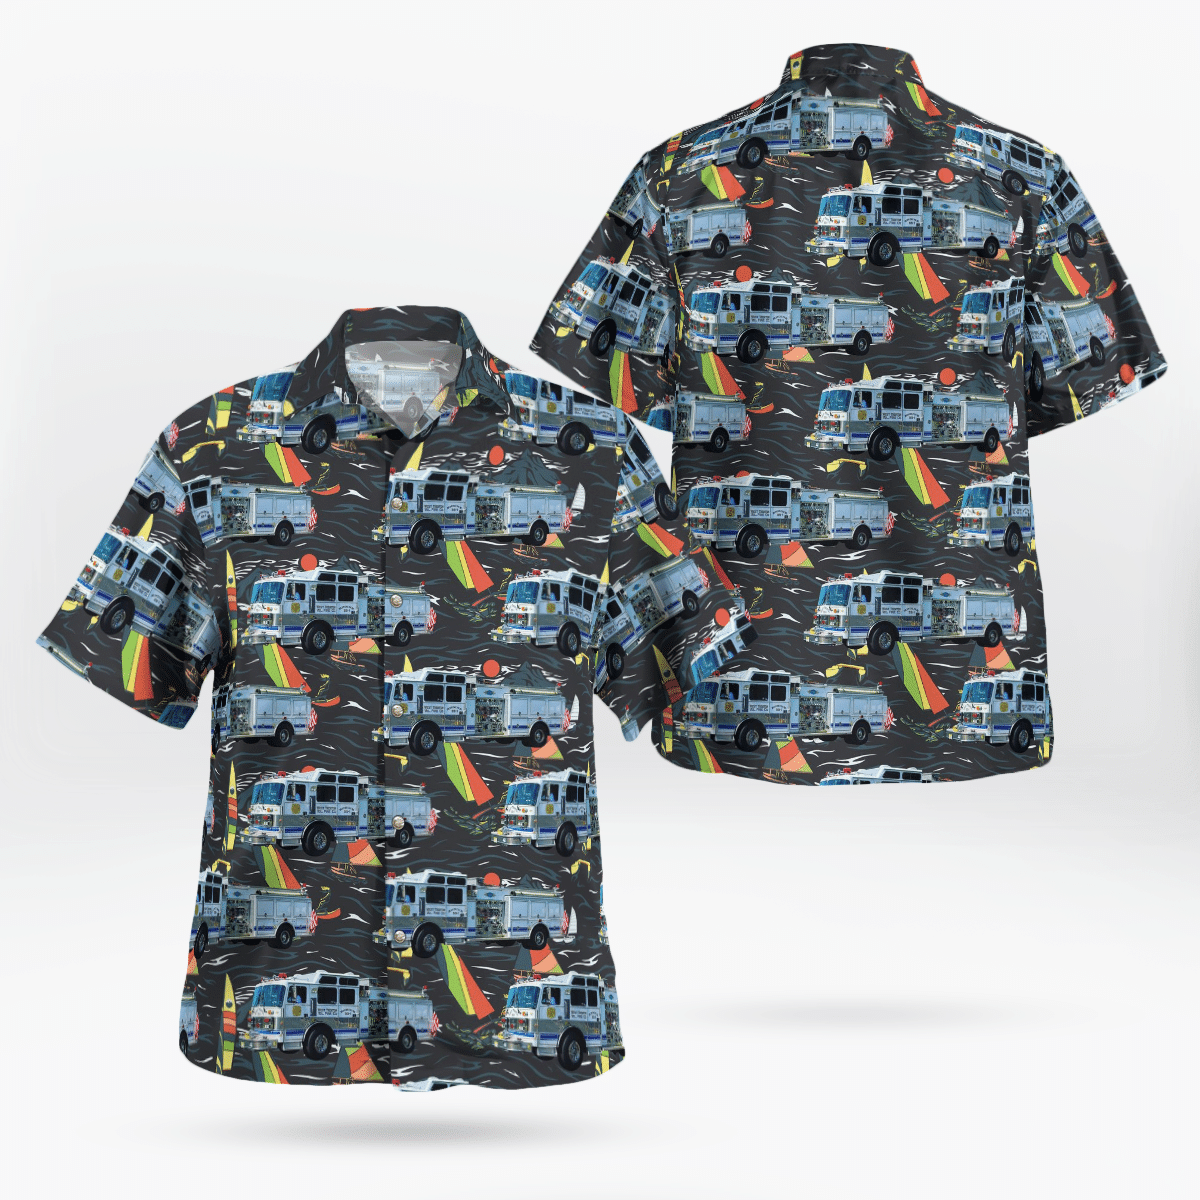 Shop now to find the perfect Hawaii Shirt for your hobby 76